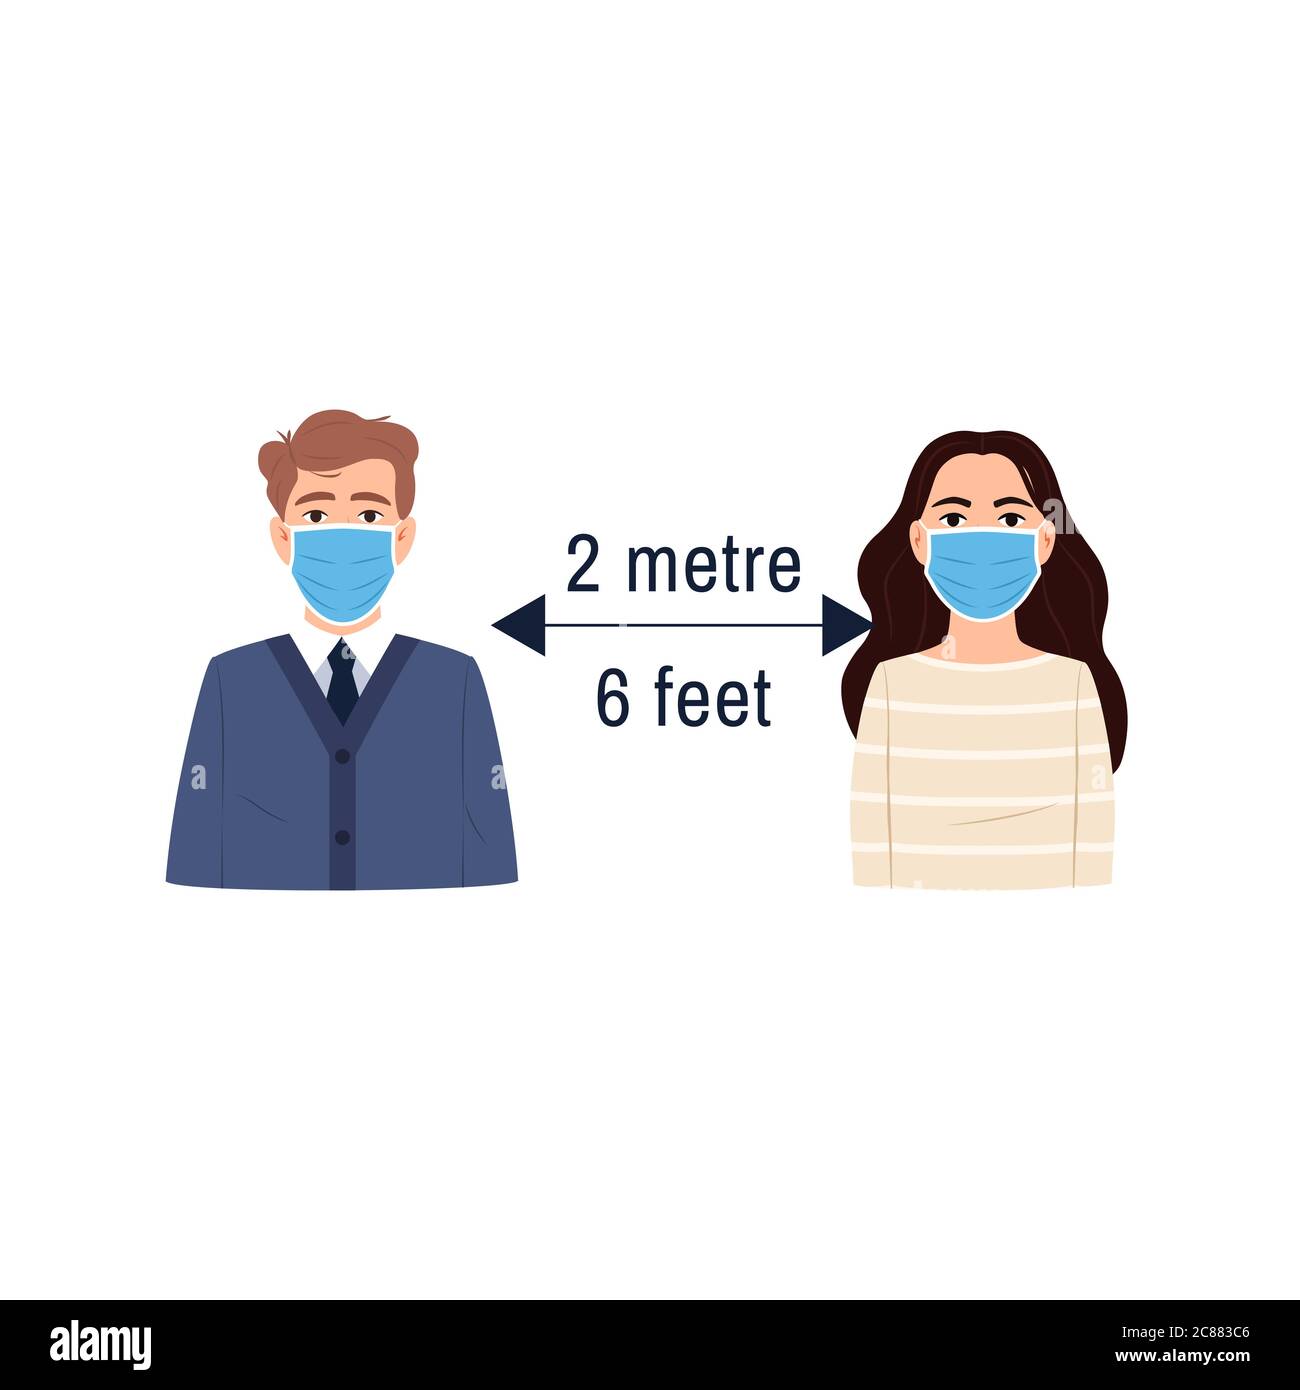 Social distancing icon. Flat people girl and man portraits wearing surgical face mask keep distance 2 meter 6 feet. Health protection concept. Epidemi Stock Vector